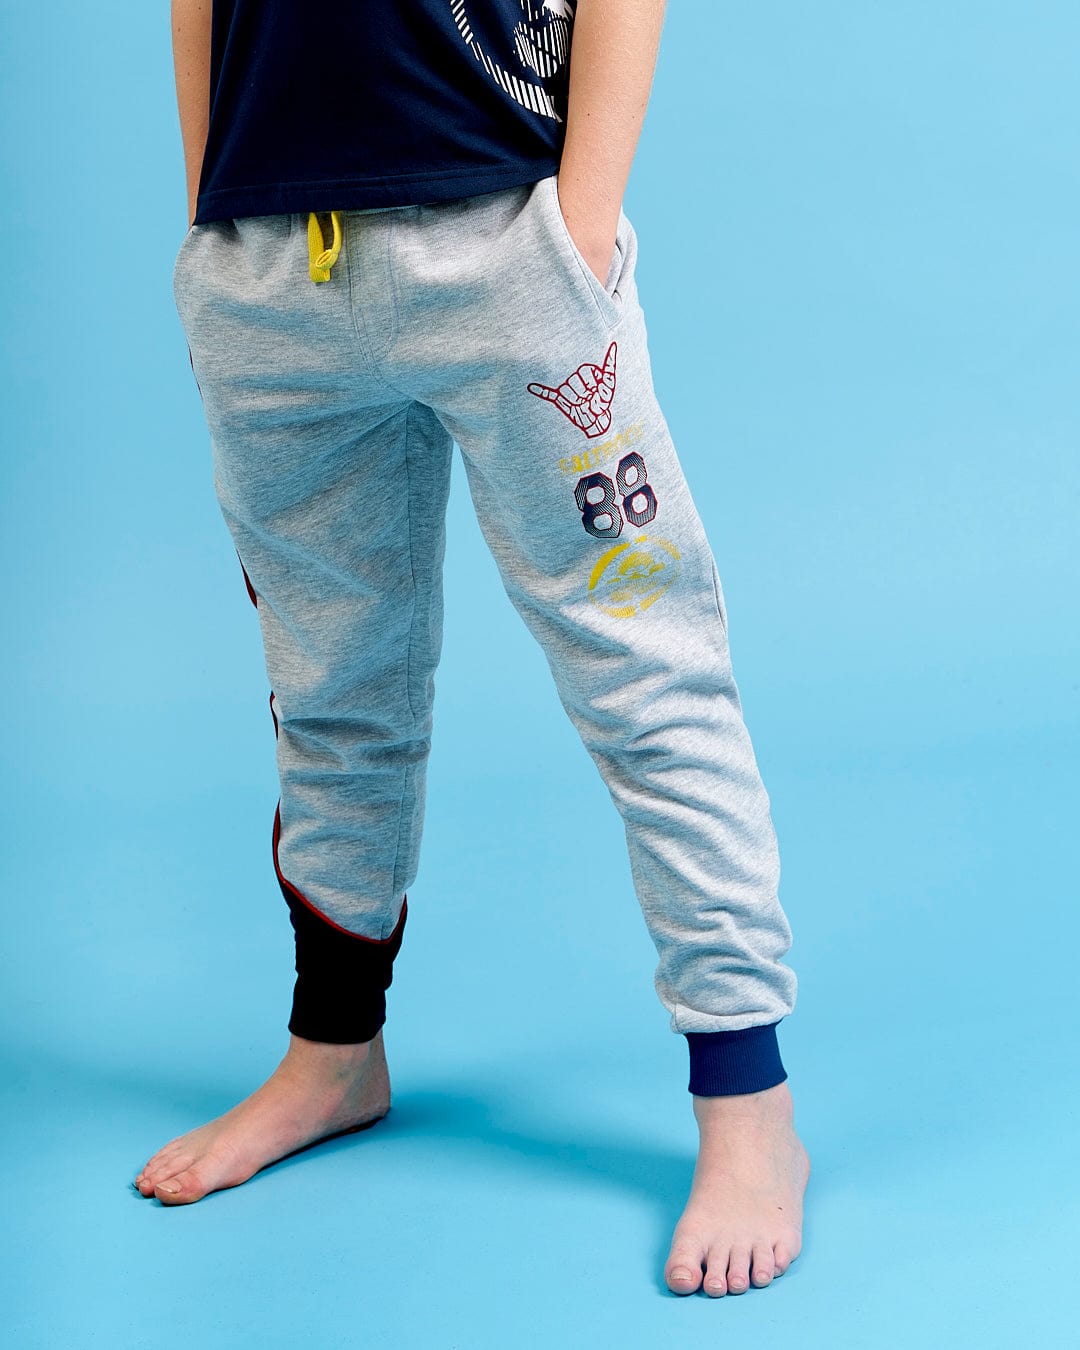 A young boy wearing Saltrock Curby - Kids Jogger - Grey joggers and a black shirt.